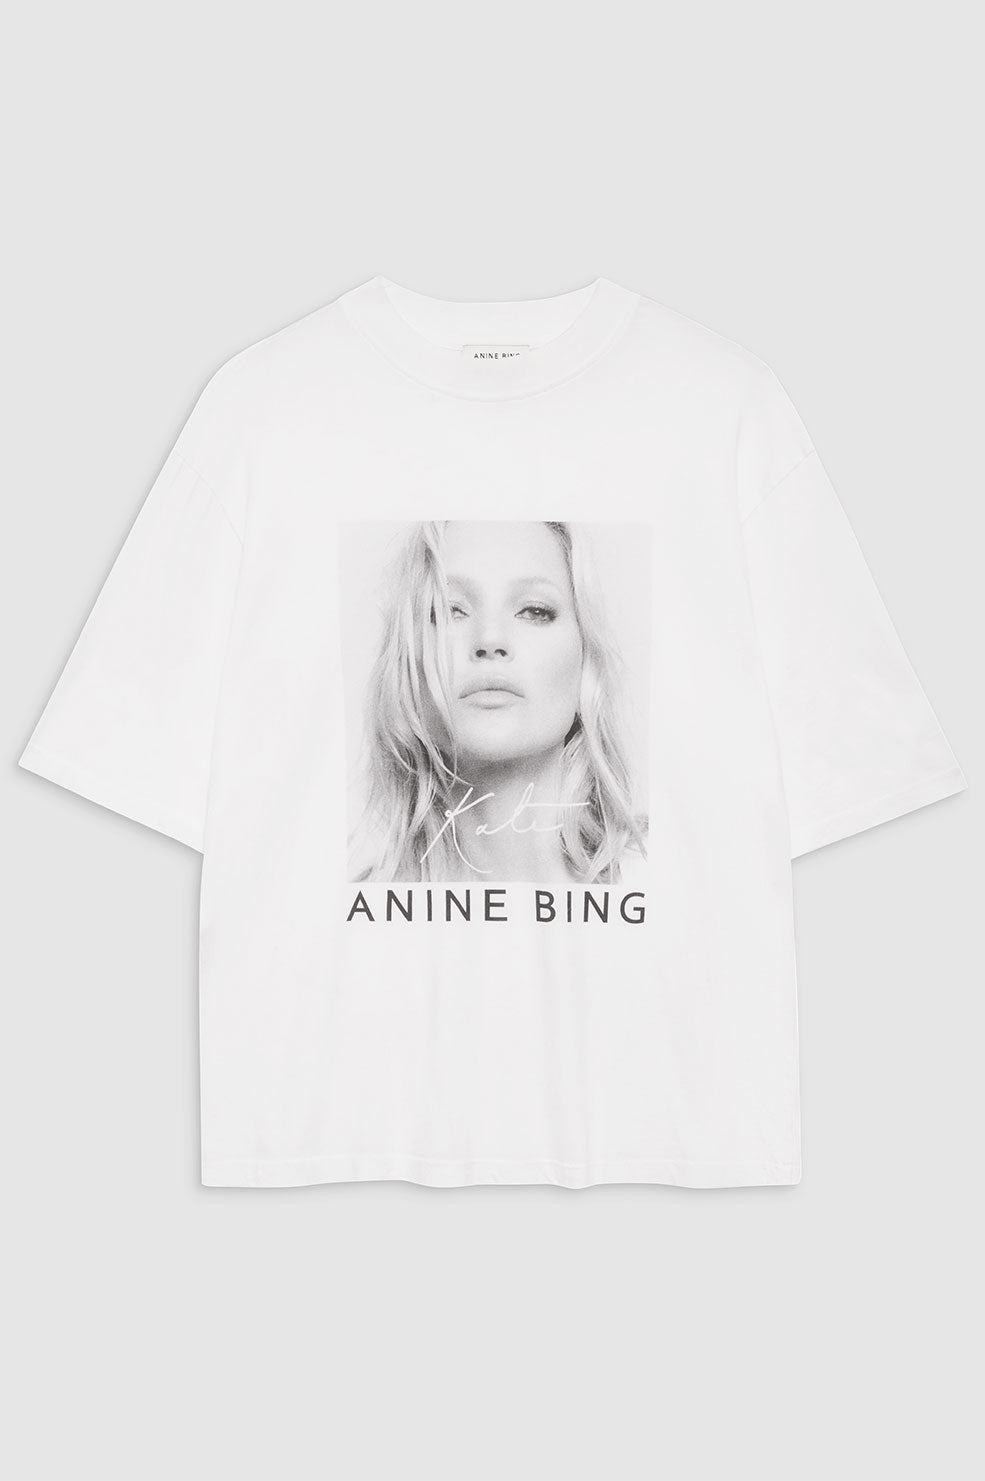 How To Style Anine Bing Graphic Tees for Spring